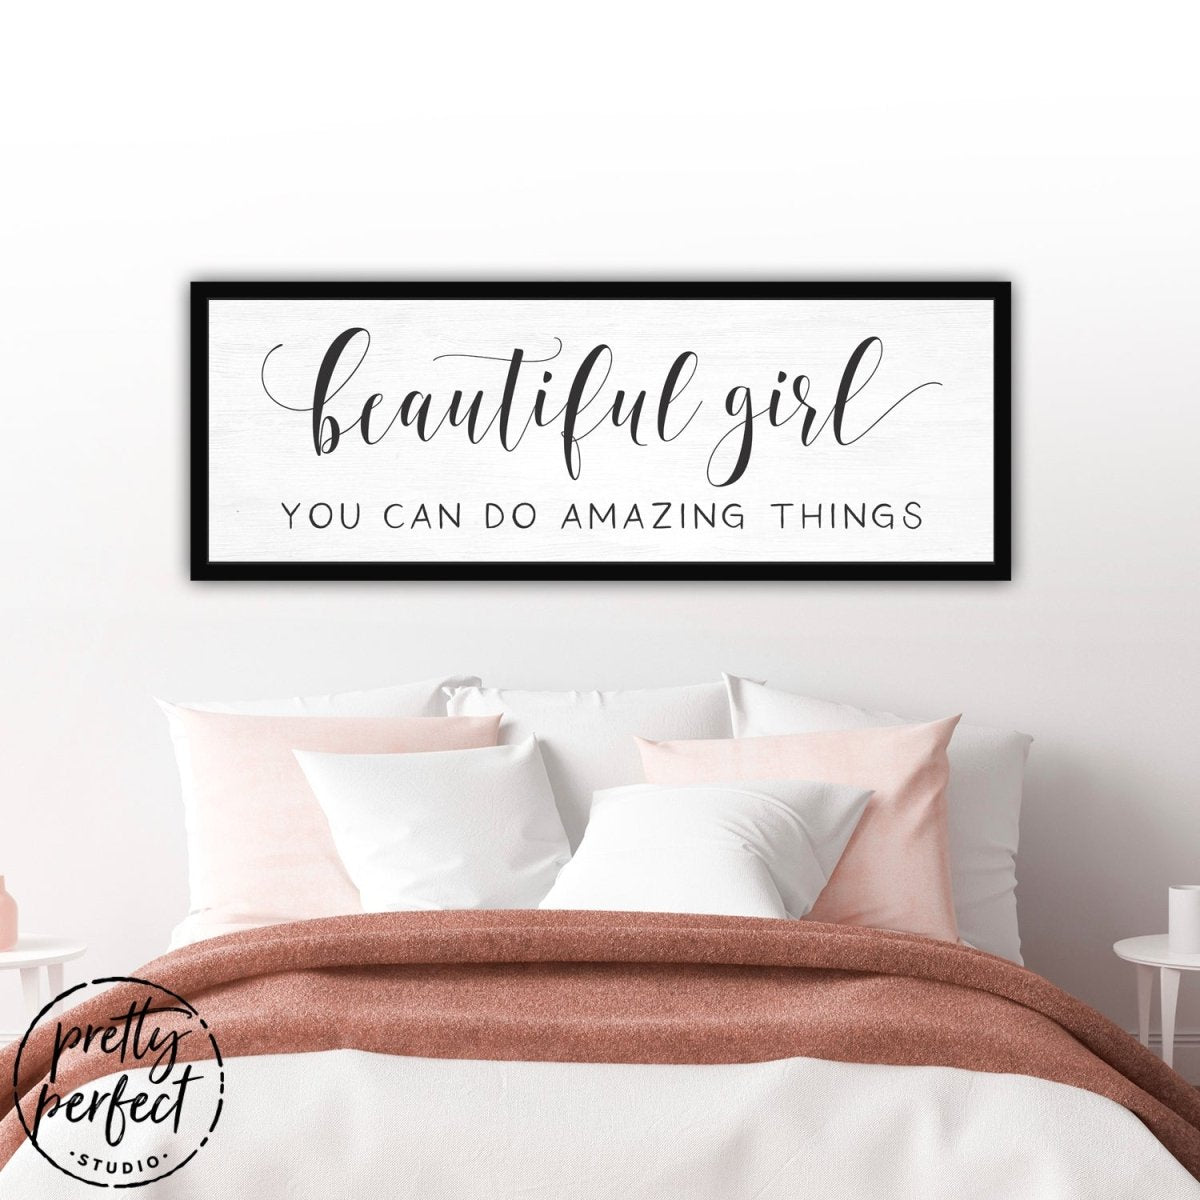 Beautiful Girl You Can Do Amazing Things Sign for Bedroom - Pretty Perfect Studio